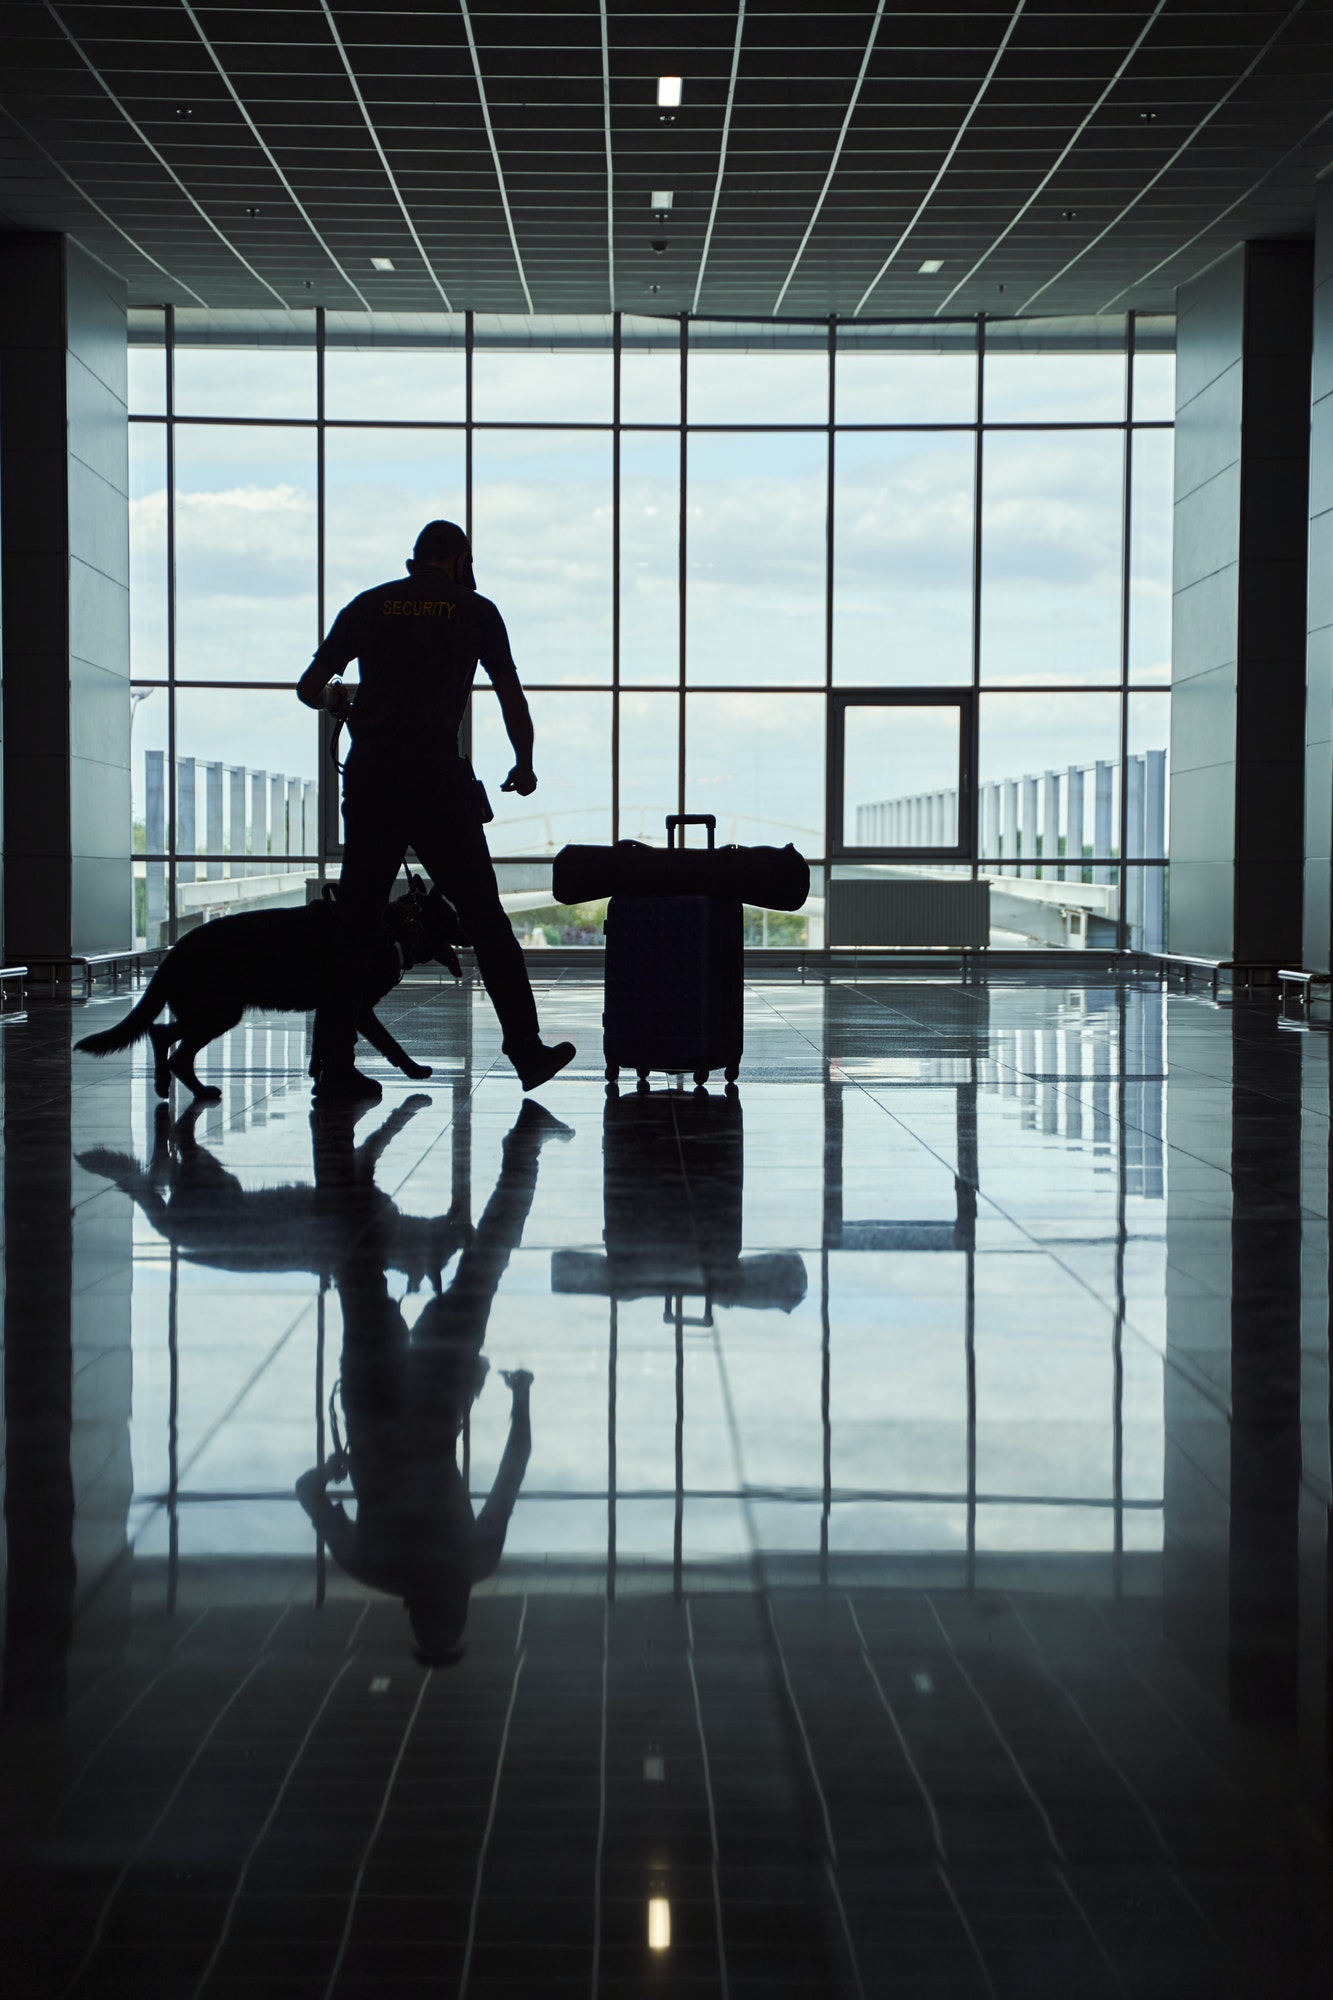 security-worker-with-detection-dog-checking-luggage-at-airport.jpg